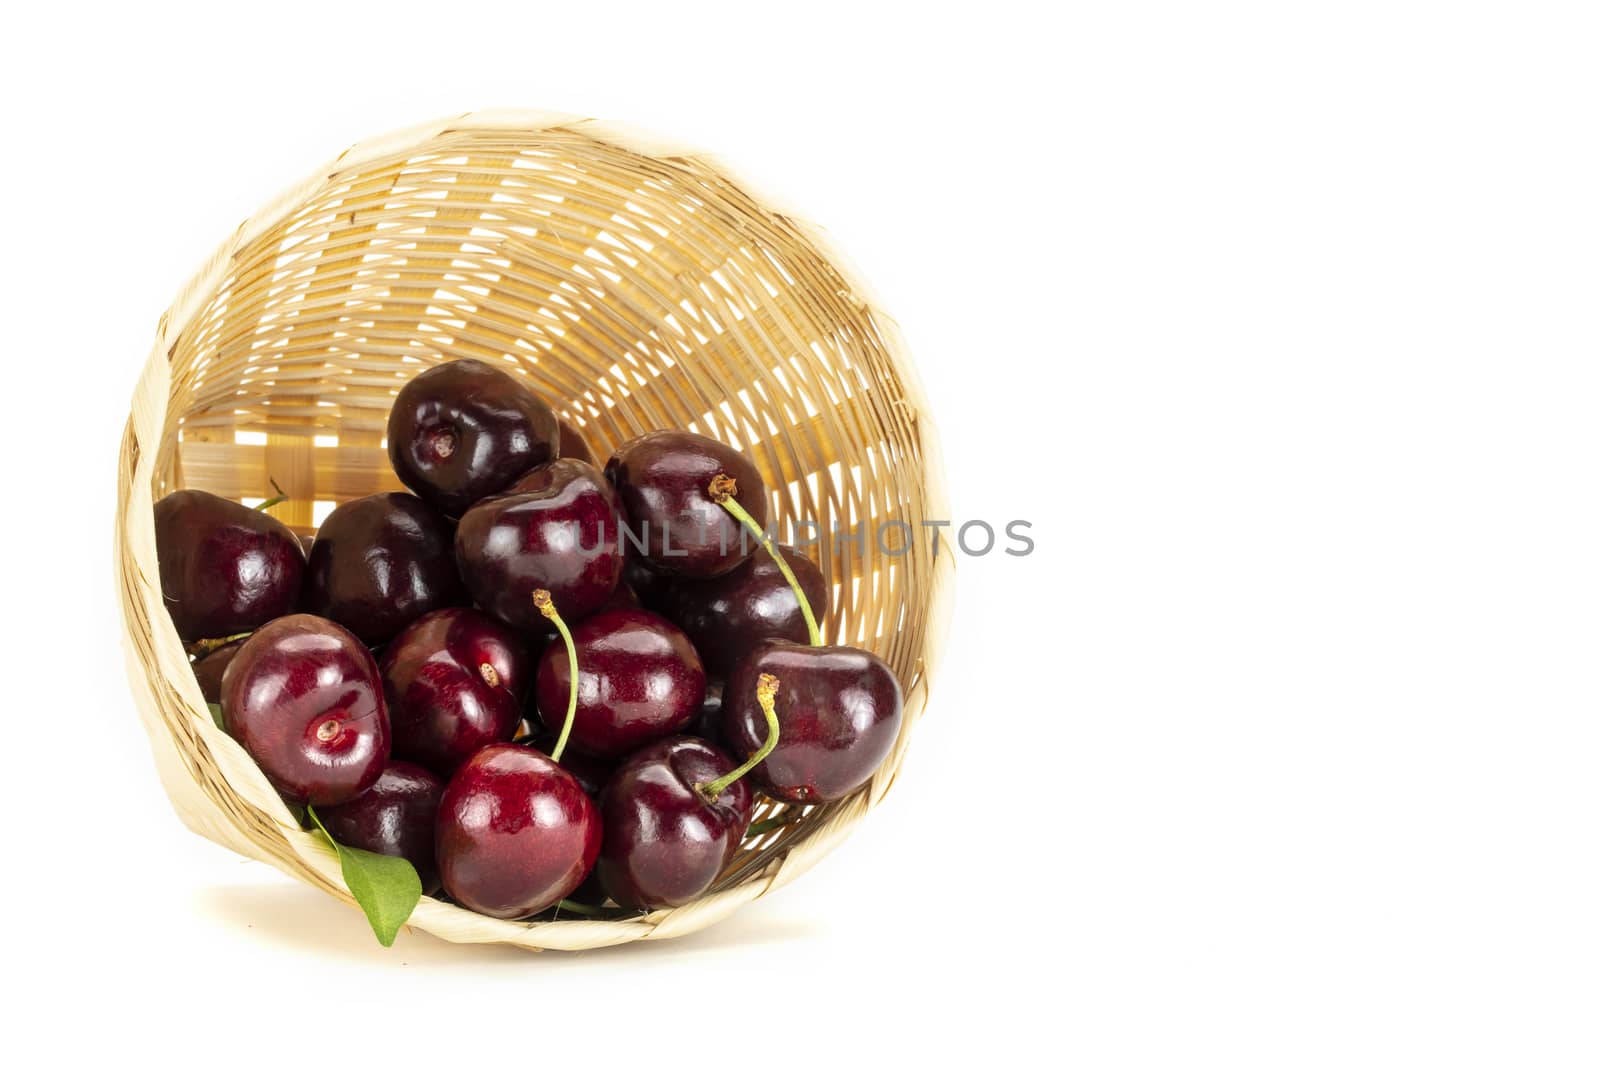 Red cherries in a weave basket. by Nawoot